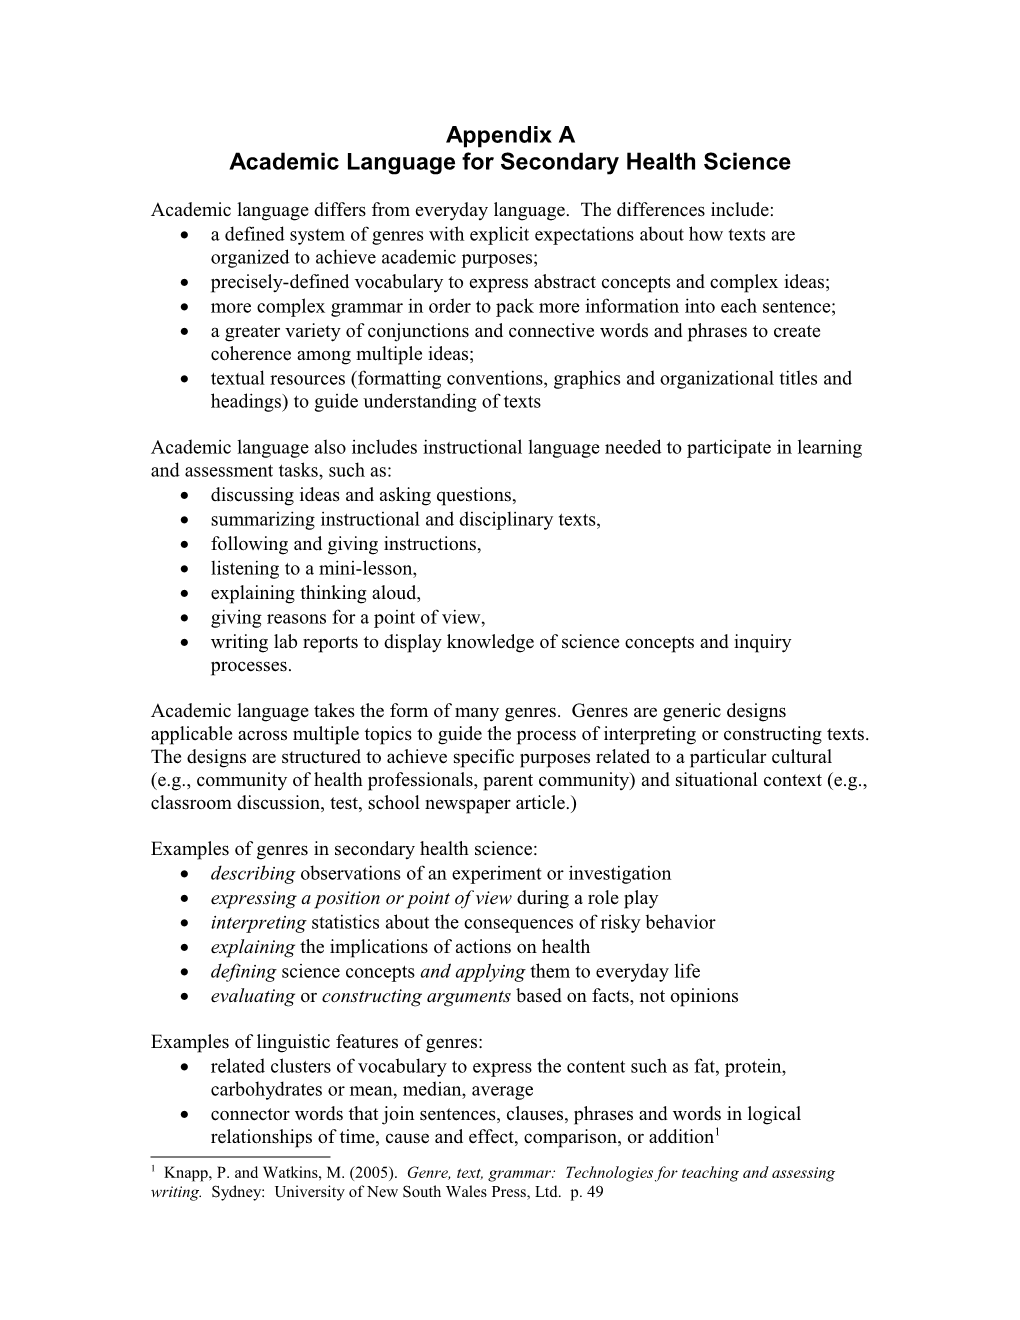 Academic Language for Secondary Health Science